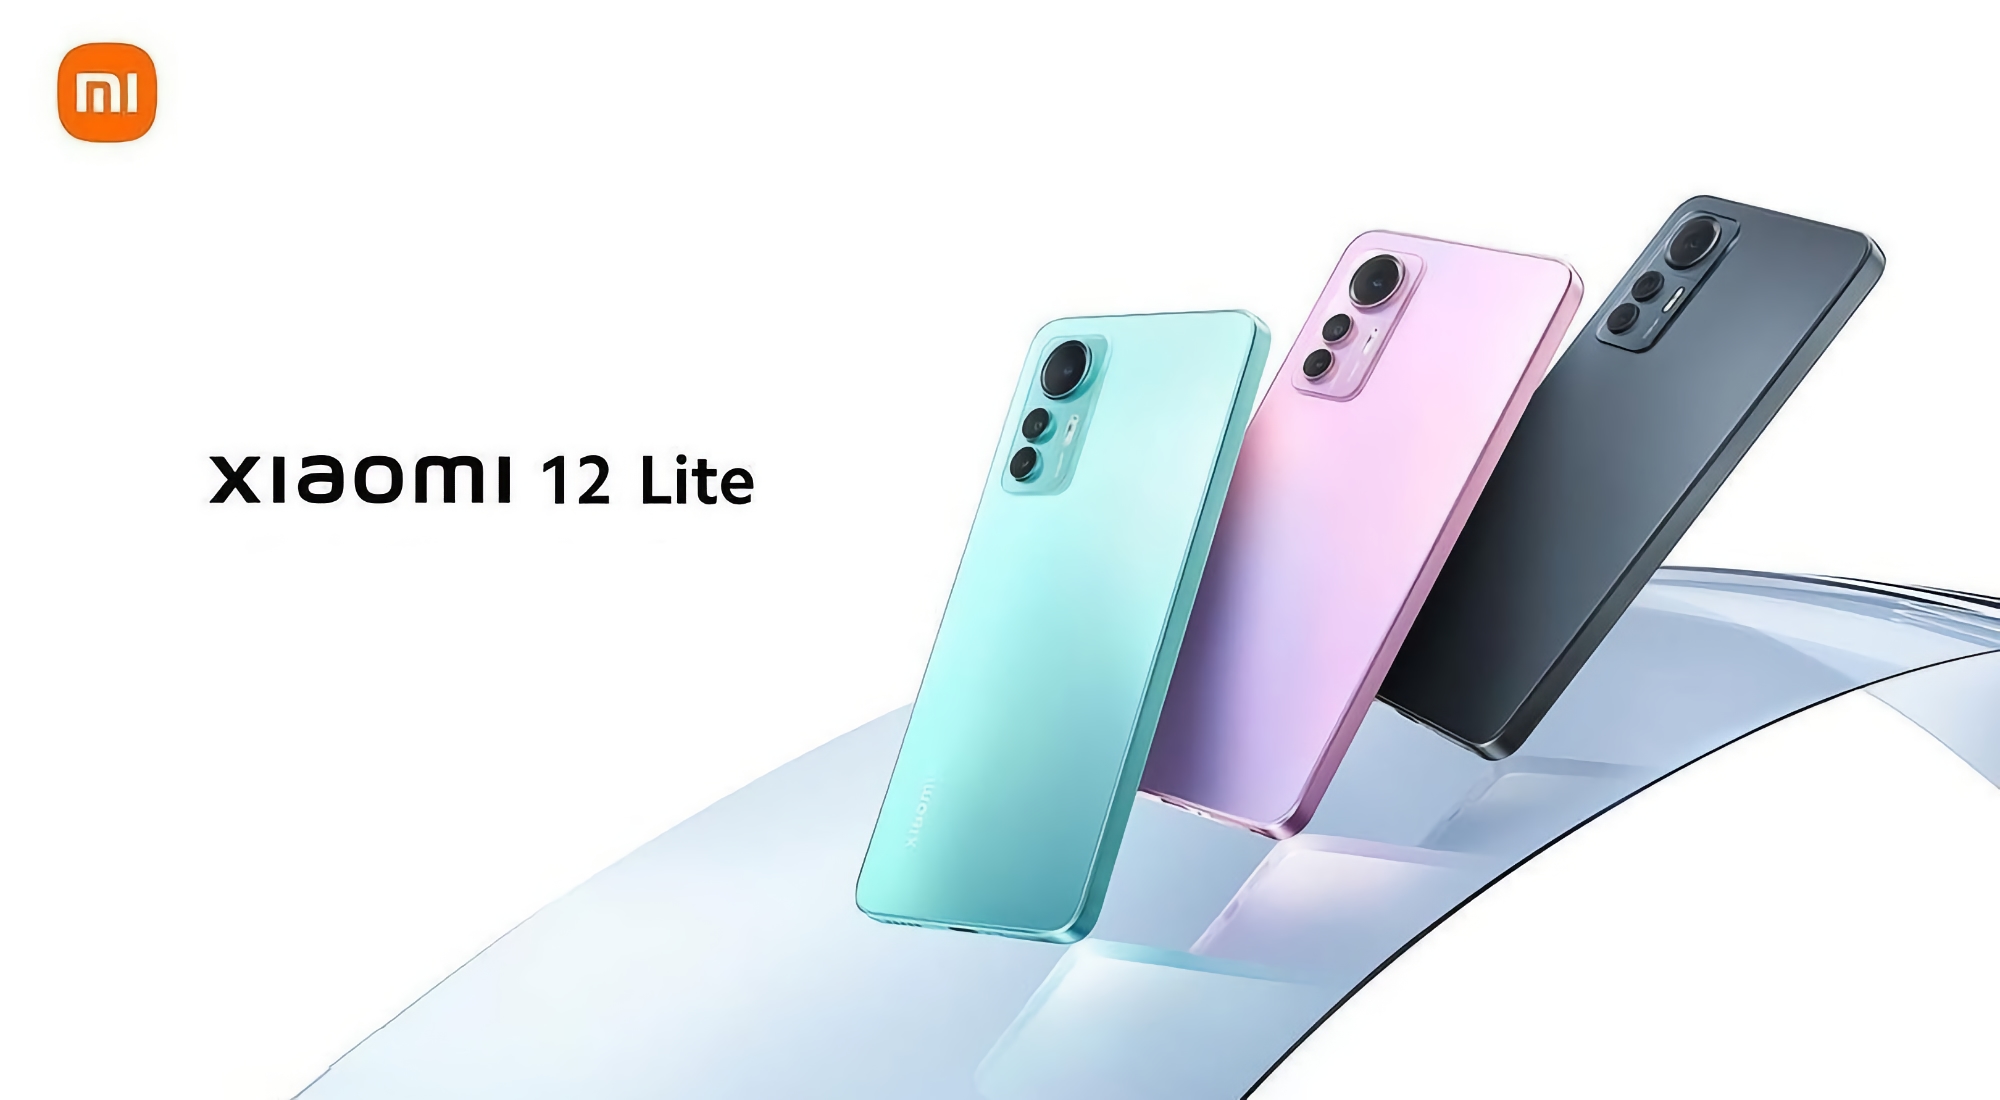 How much will Xiaomi 12 Lite with 120Hz OLED panel, Snapdragon 778G+ chip and 108MP camera cost?